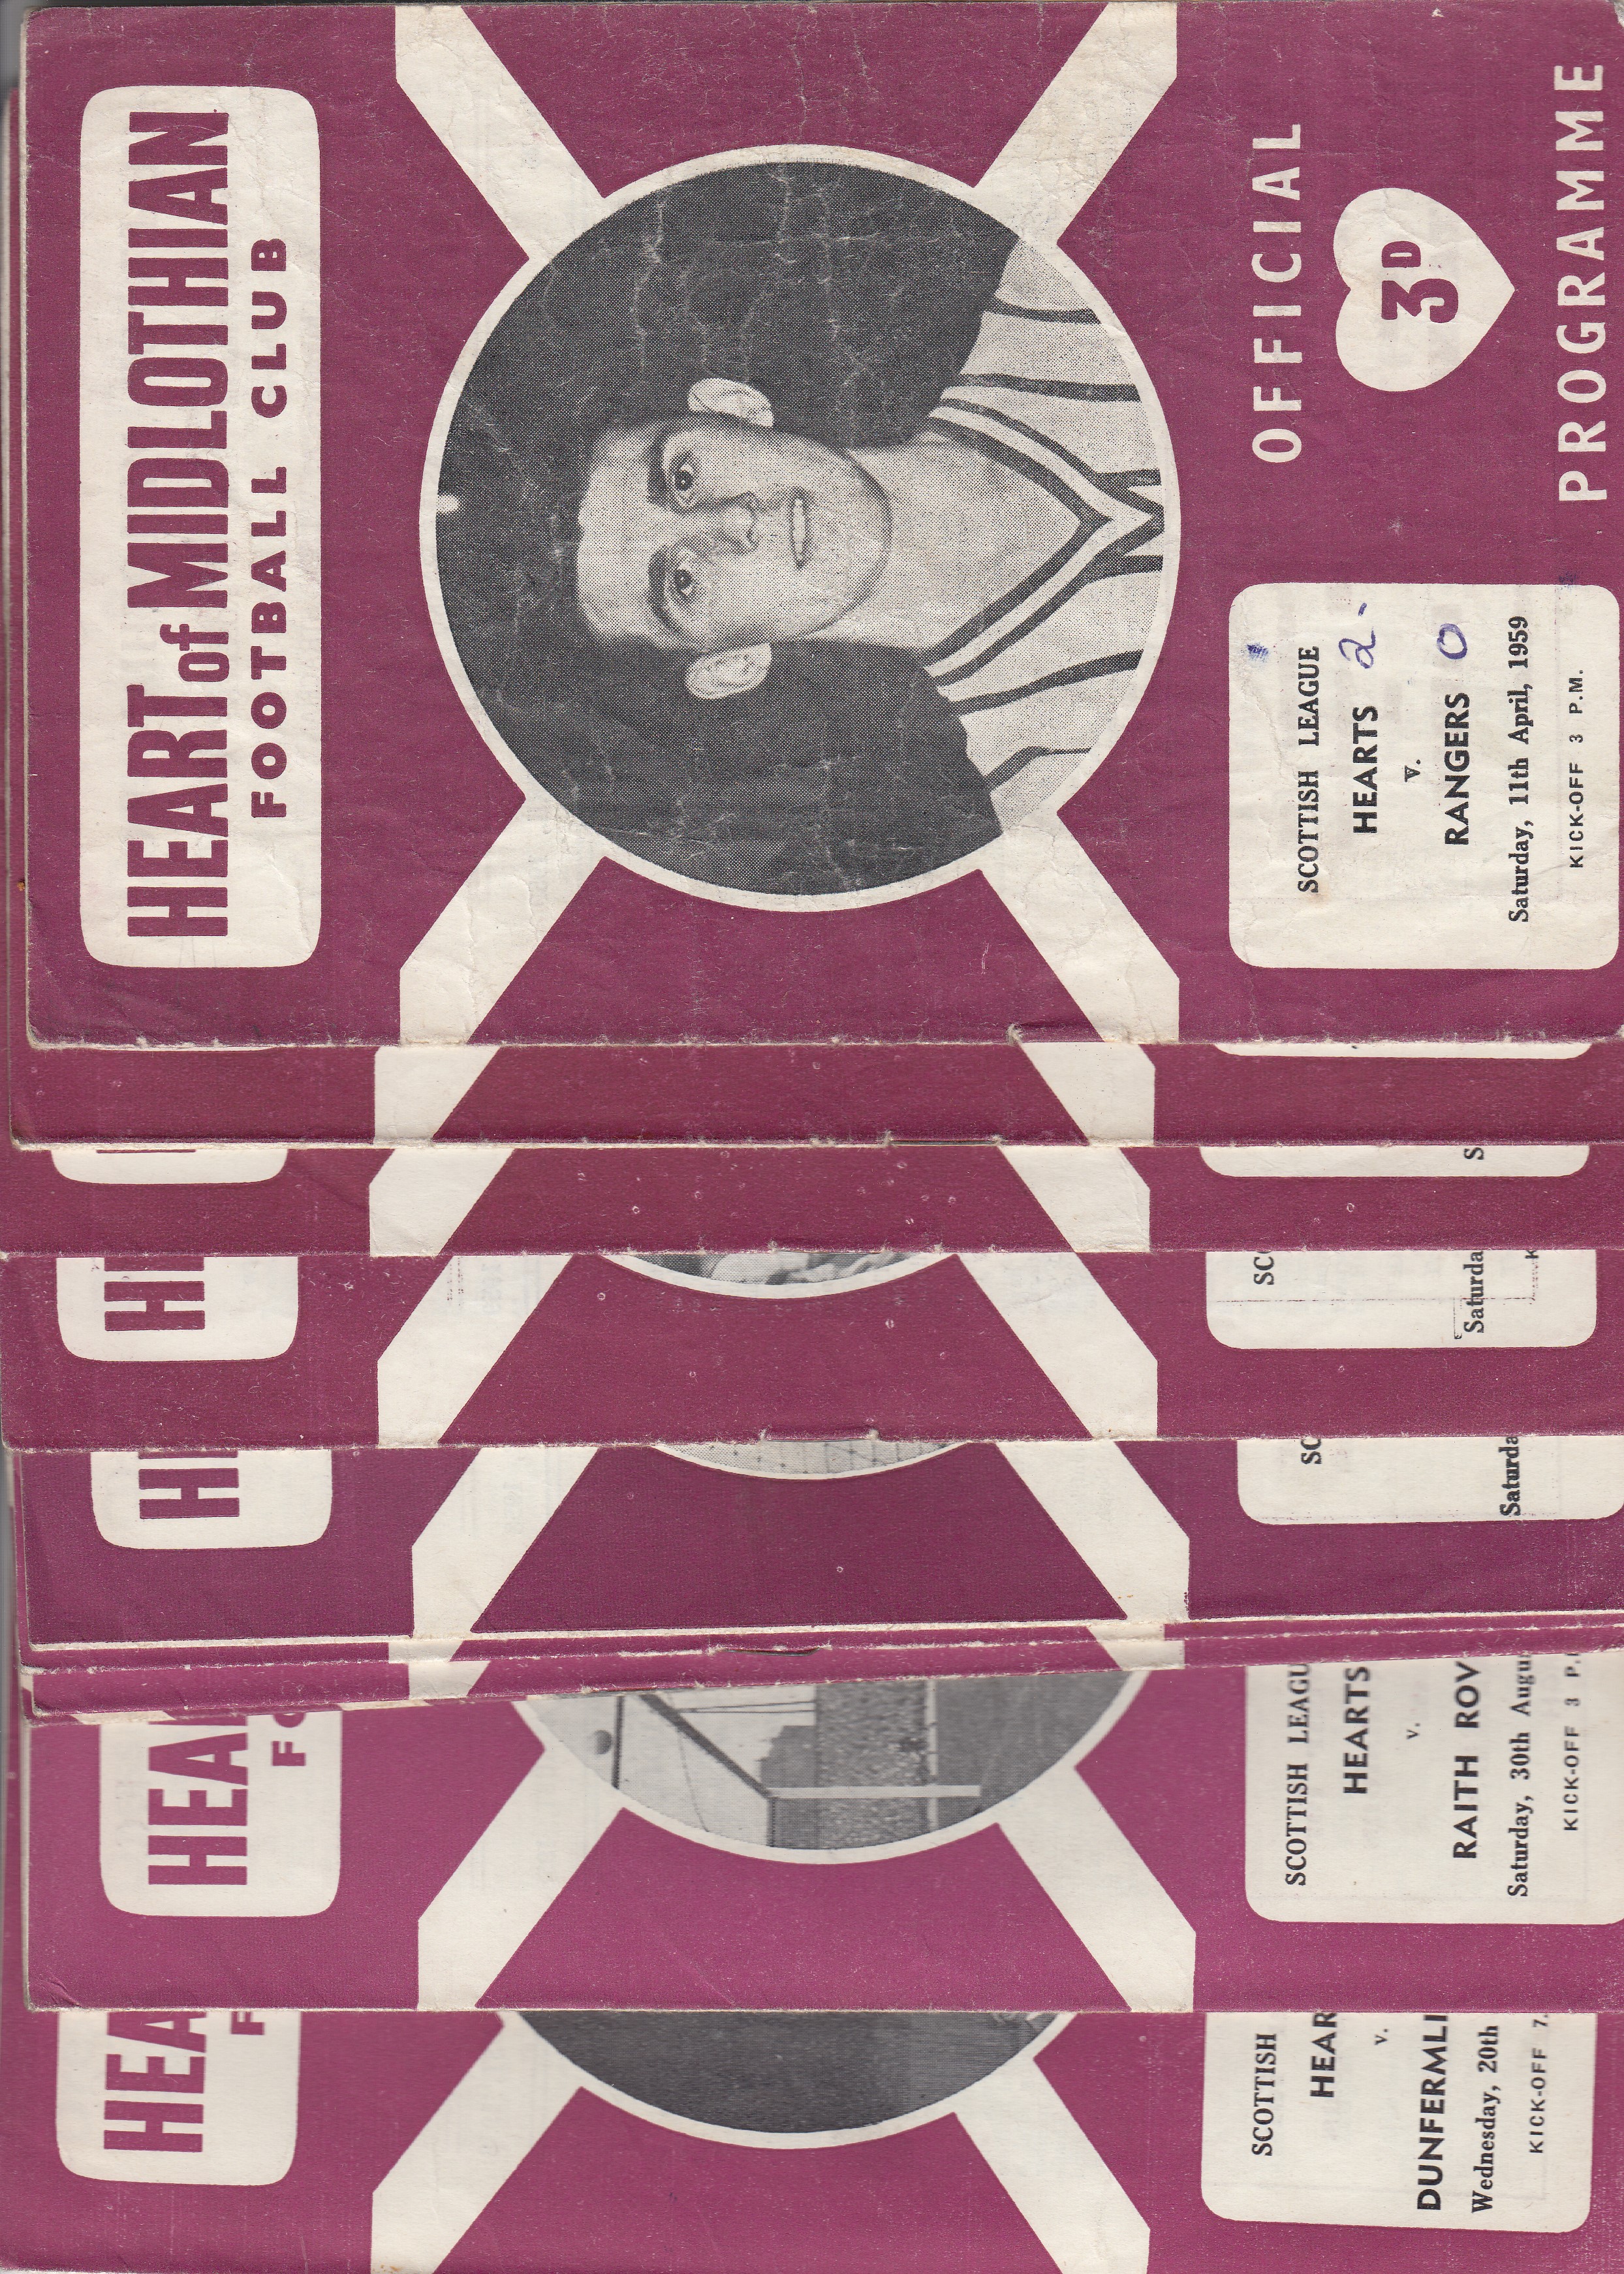 HEARTS 58-59 Eleven Hearts home programmes, 58-59, includes European Cup v Standard Liege, scores on - Image 2 of 3